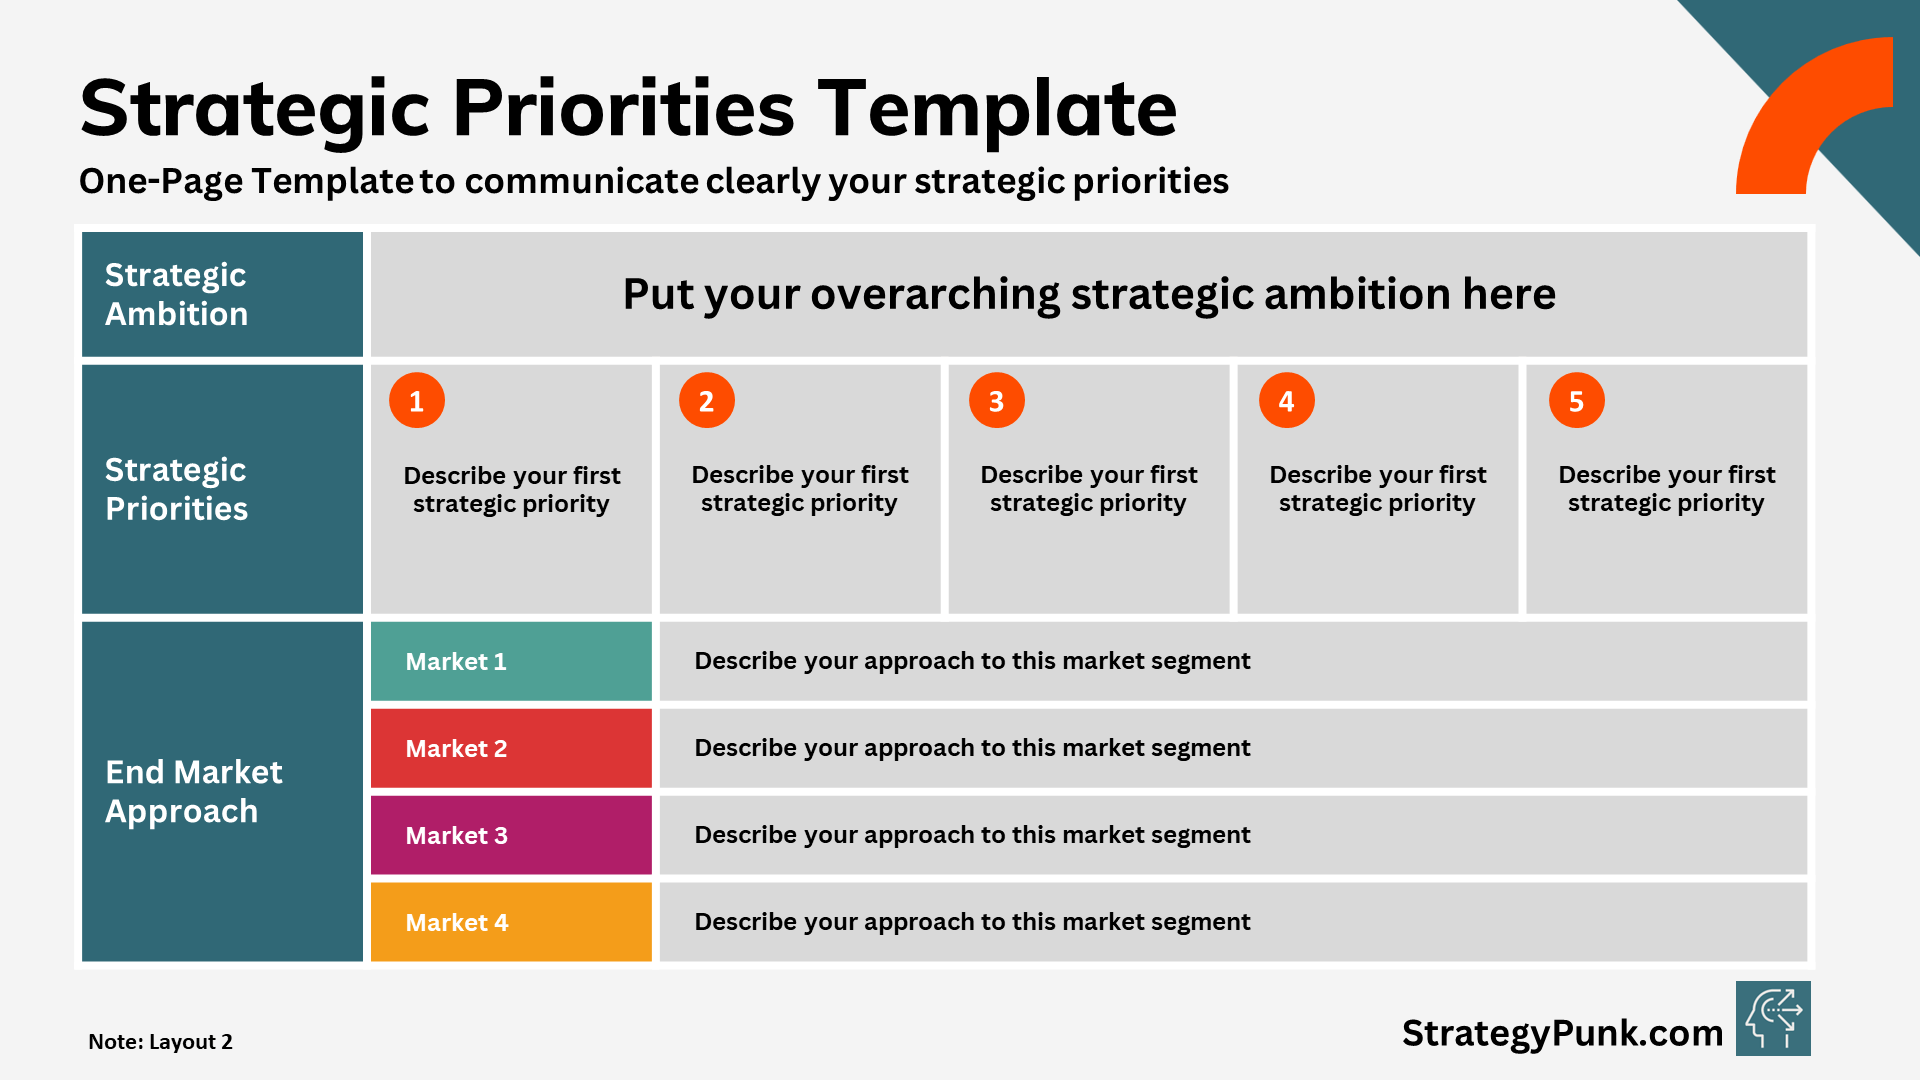 Strategic Priorities One-Pager Template To Achieve Your Ambition